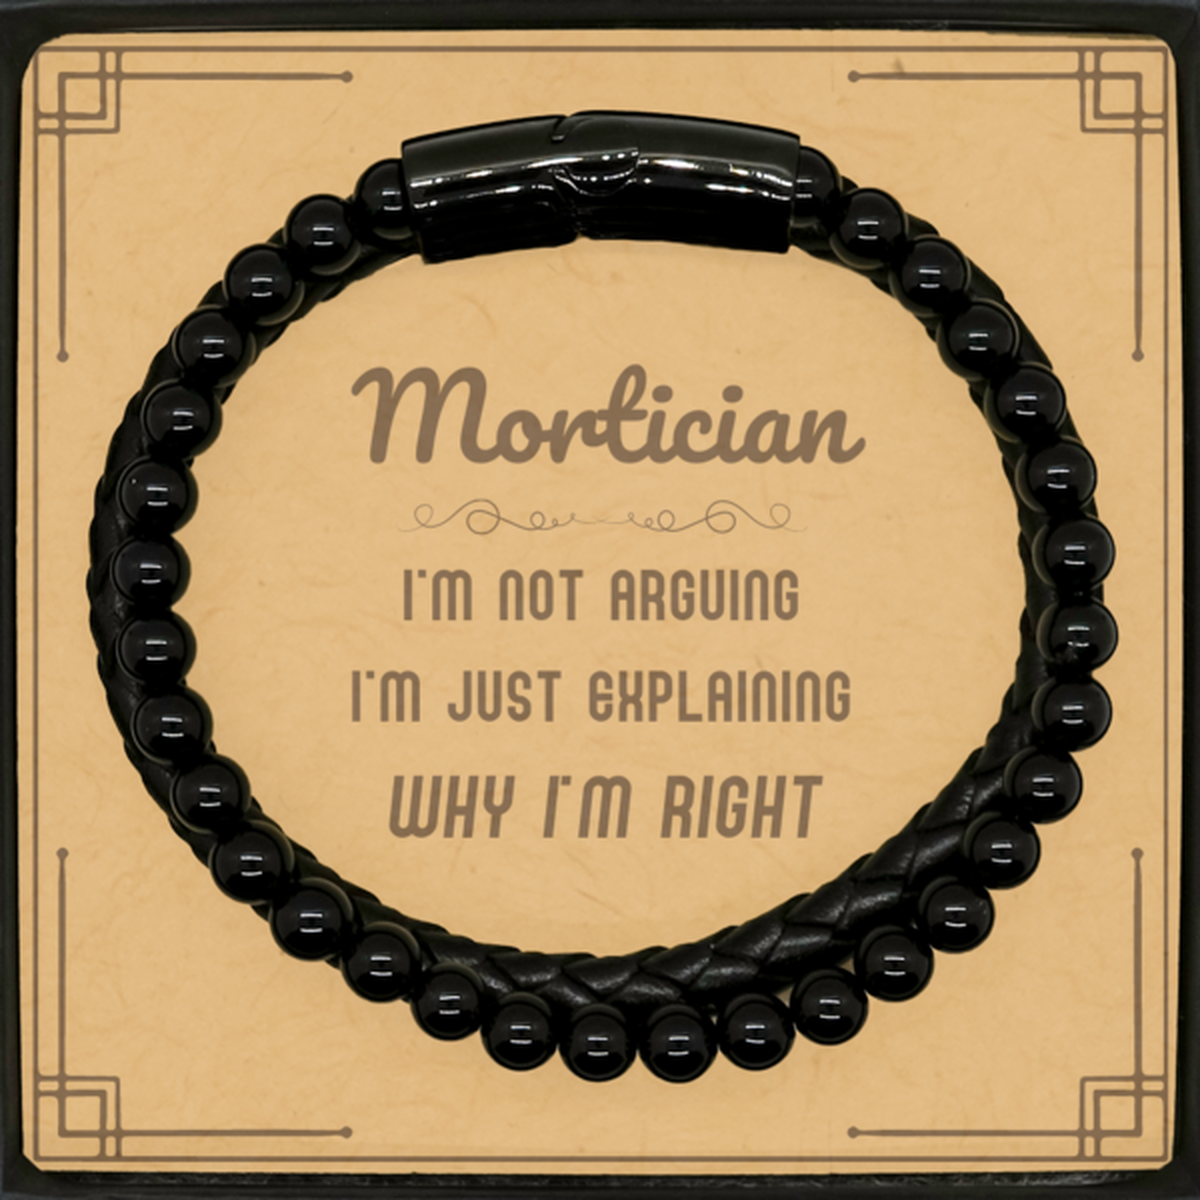 Mortician I'm not Arguing. I'm Just Explaining Why I'm RIGHT Stone Leather Bracelets, Funny Saying Quote Mortician Gifts For Mortician Message Card Graduation Birthday Christmas Gifts for Men Women Coworker